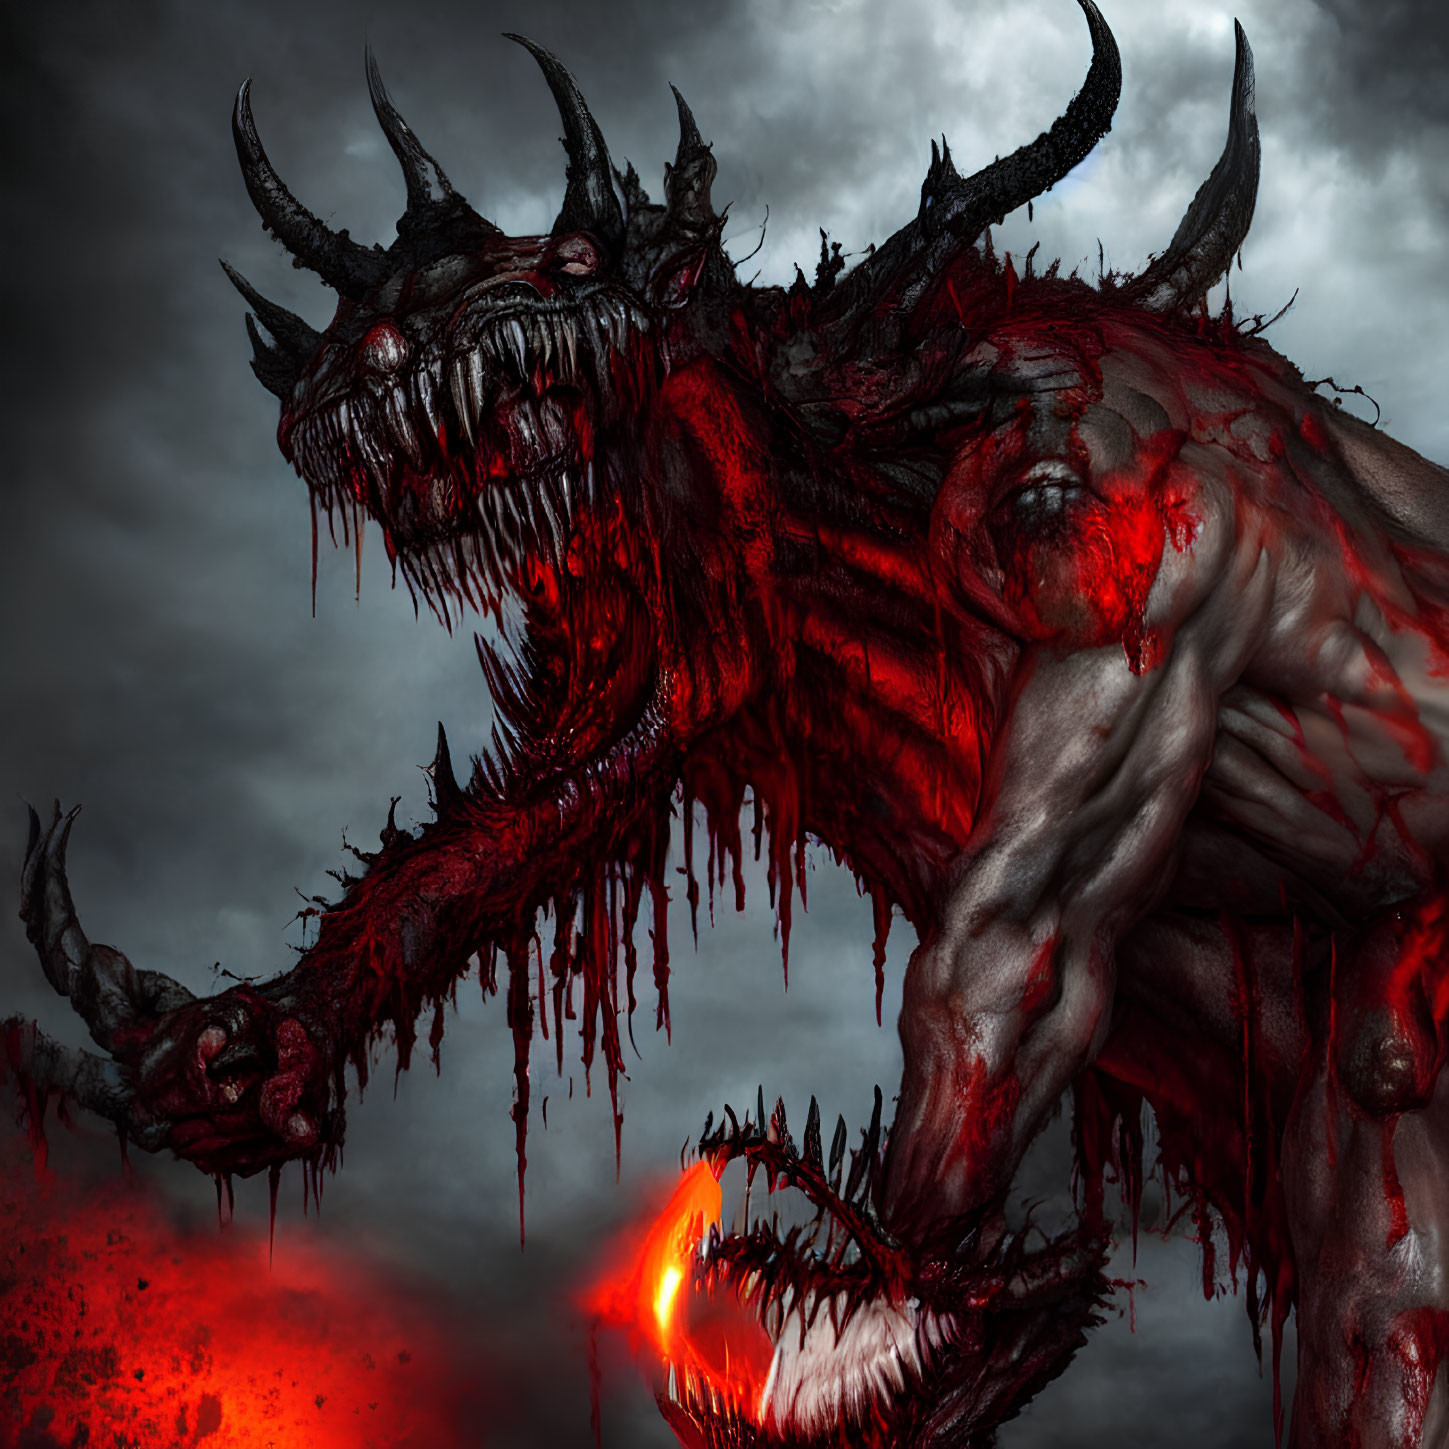 Muscular red demon with horns and glowing eyes in dark setting